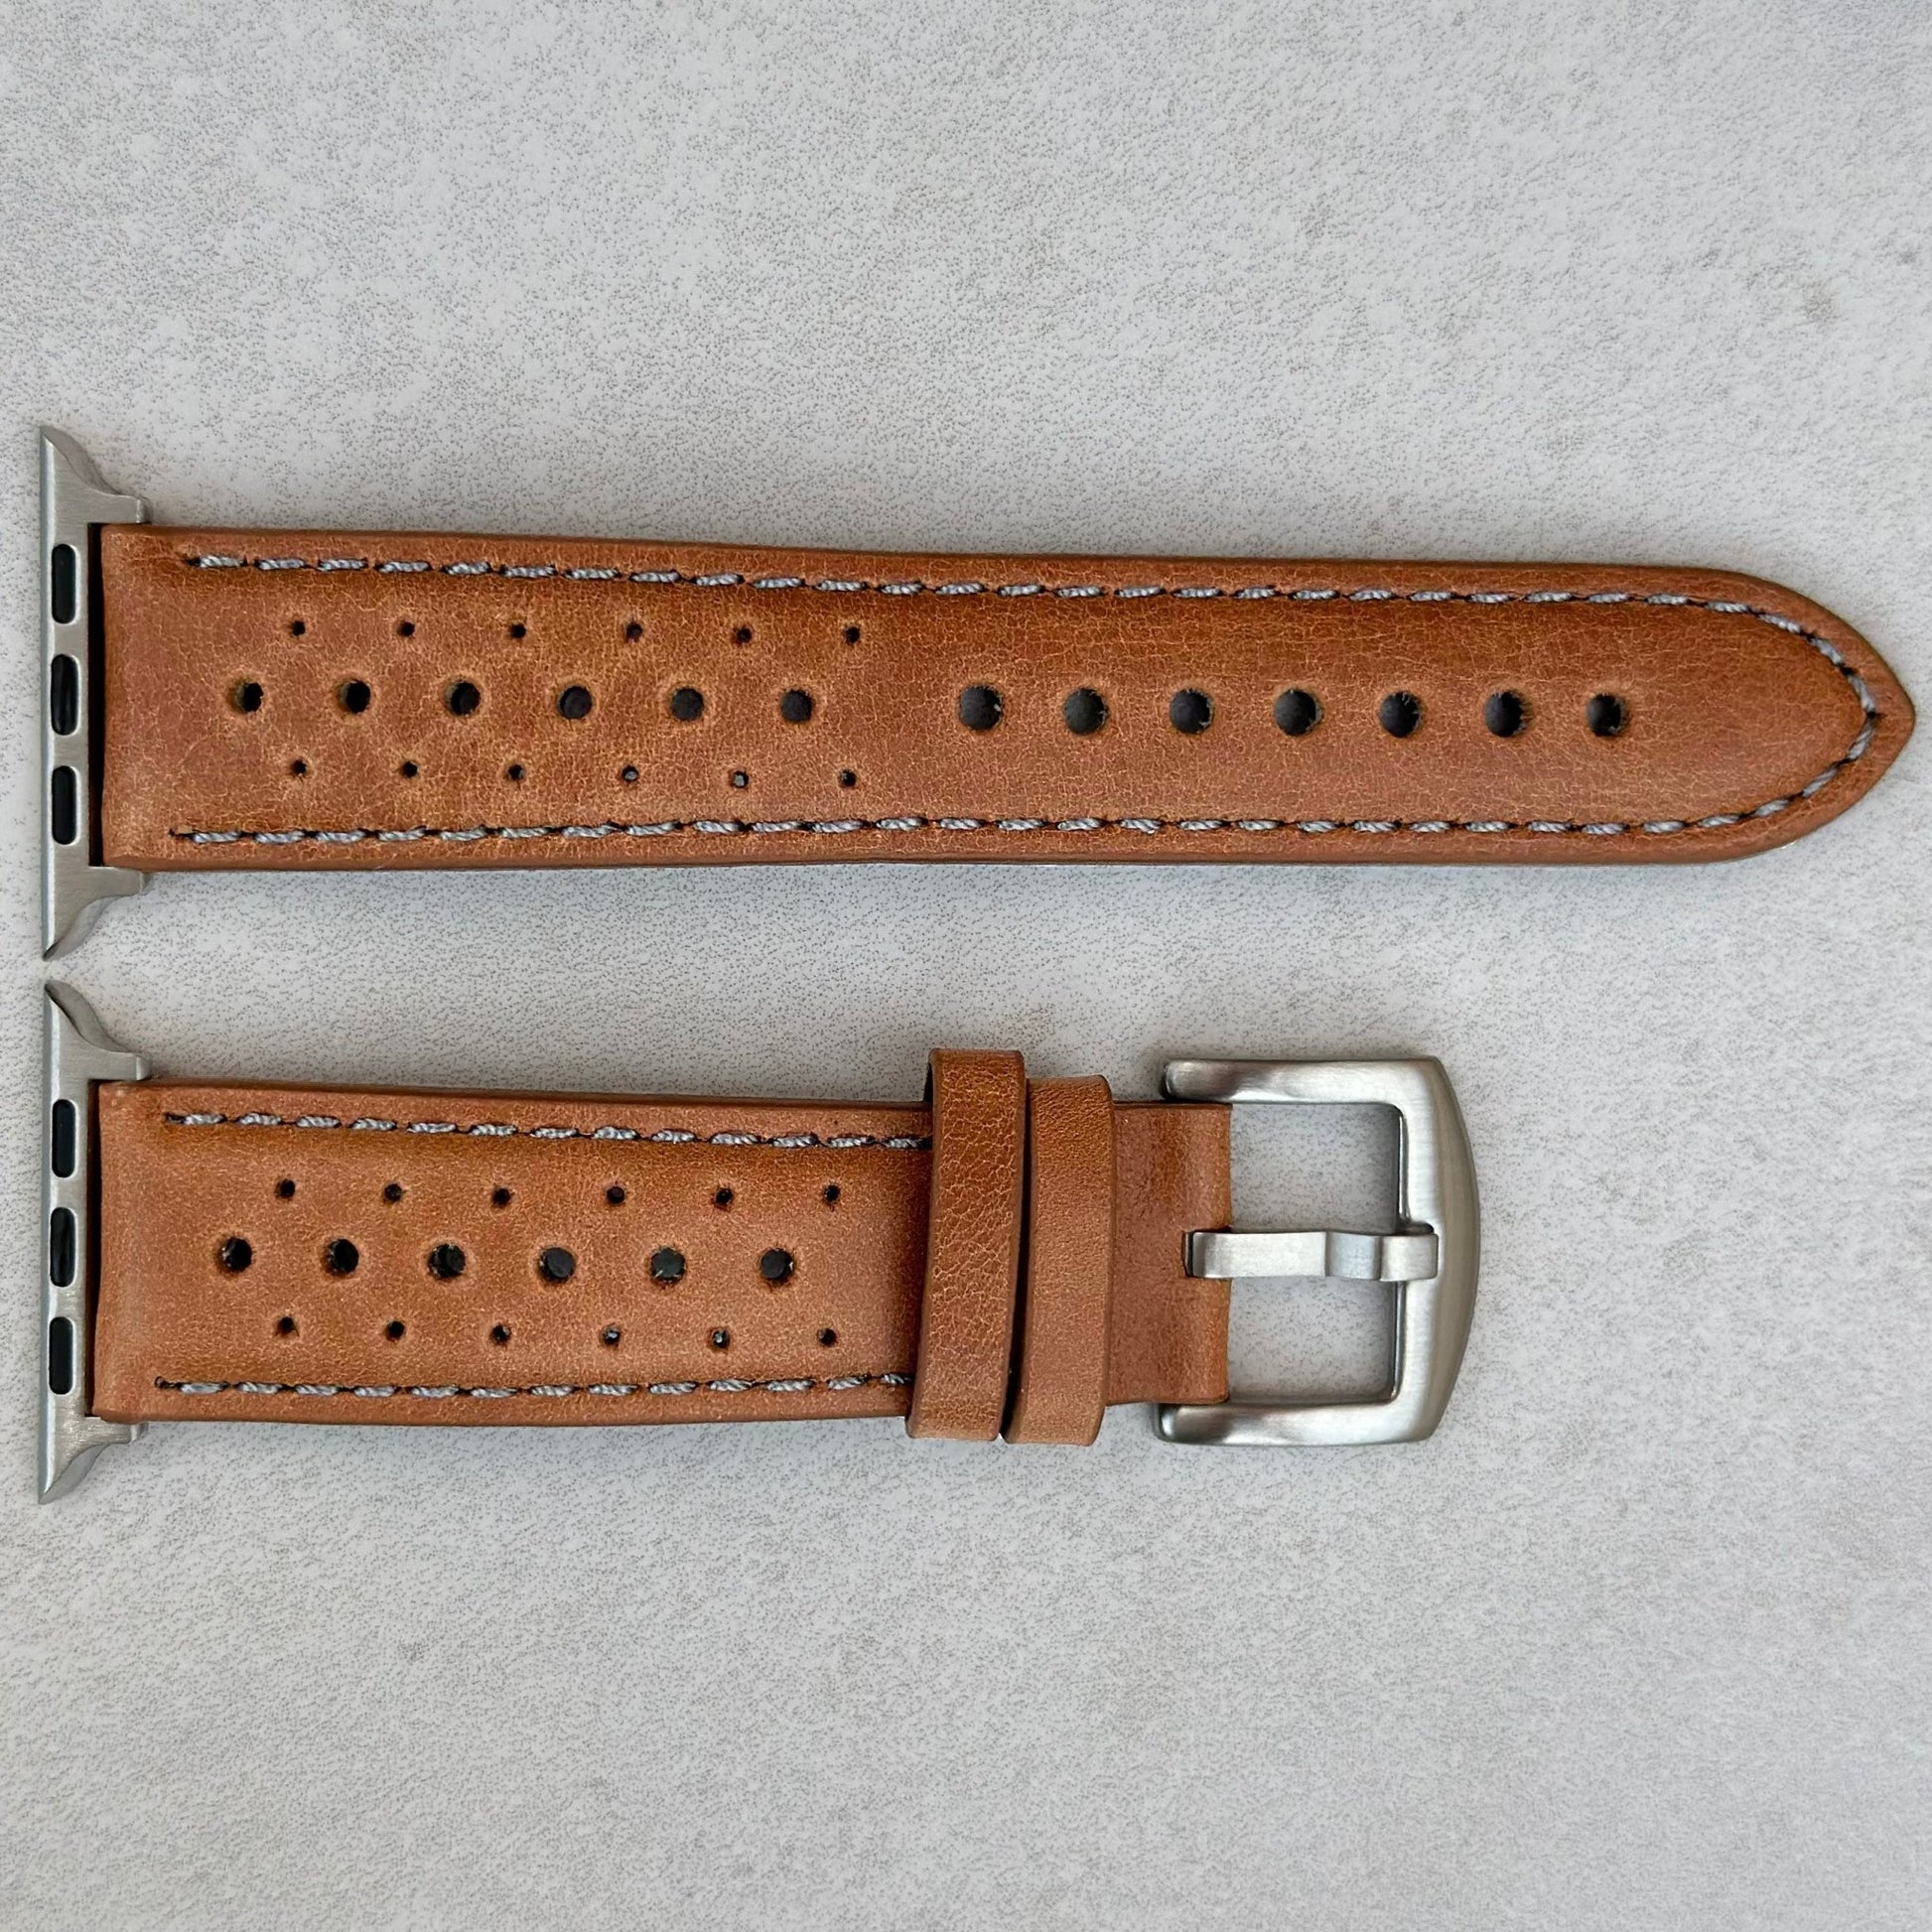 Montecarlo tan full grain leather Apple Watch strap. Contrast grey stitching. Watch And Strap